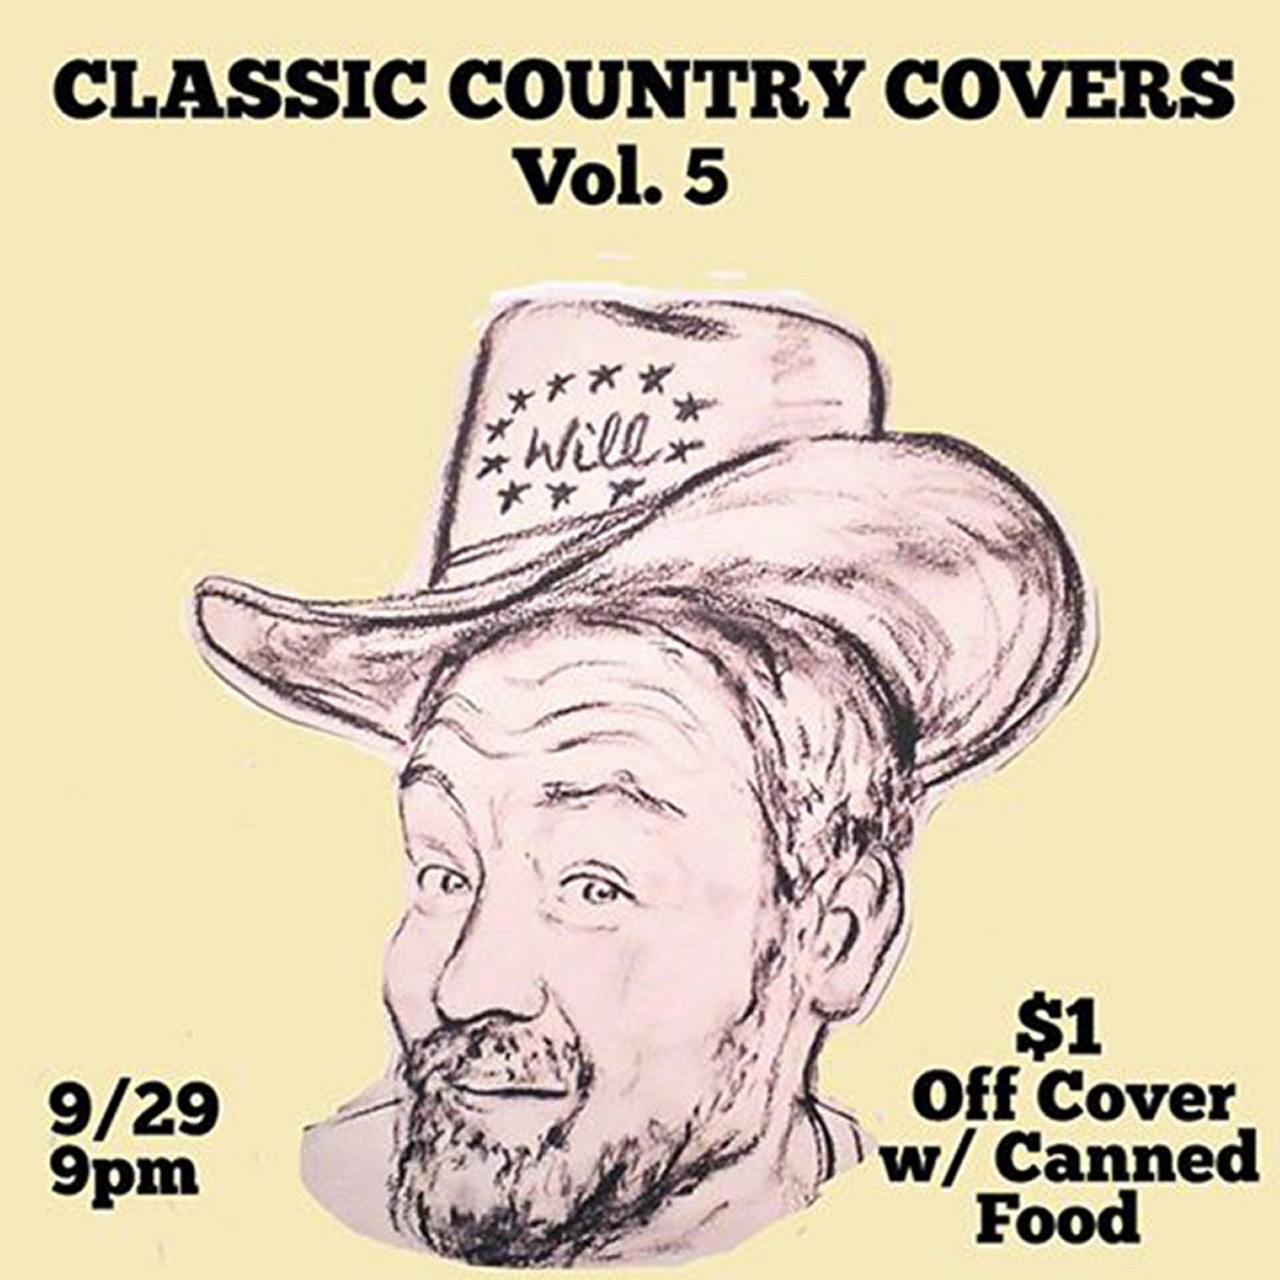 Thursday, Sept. 29Country Covers Vol. 5 at Will's Pub